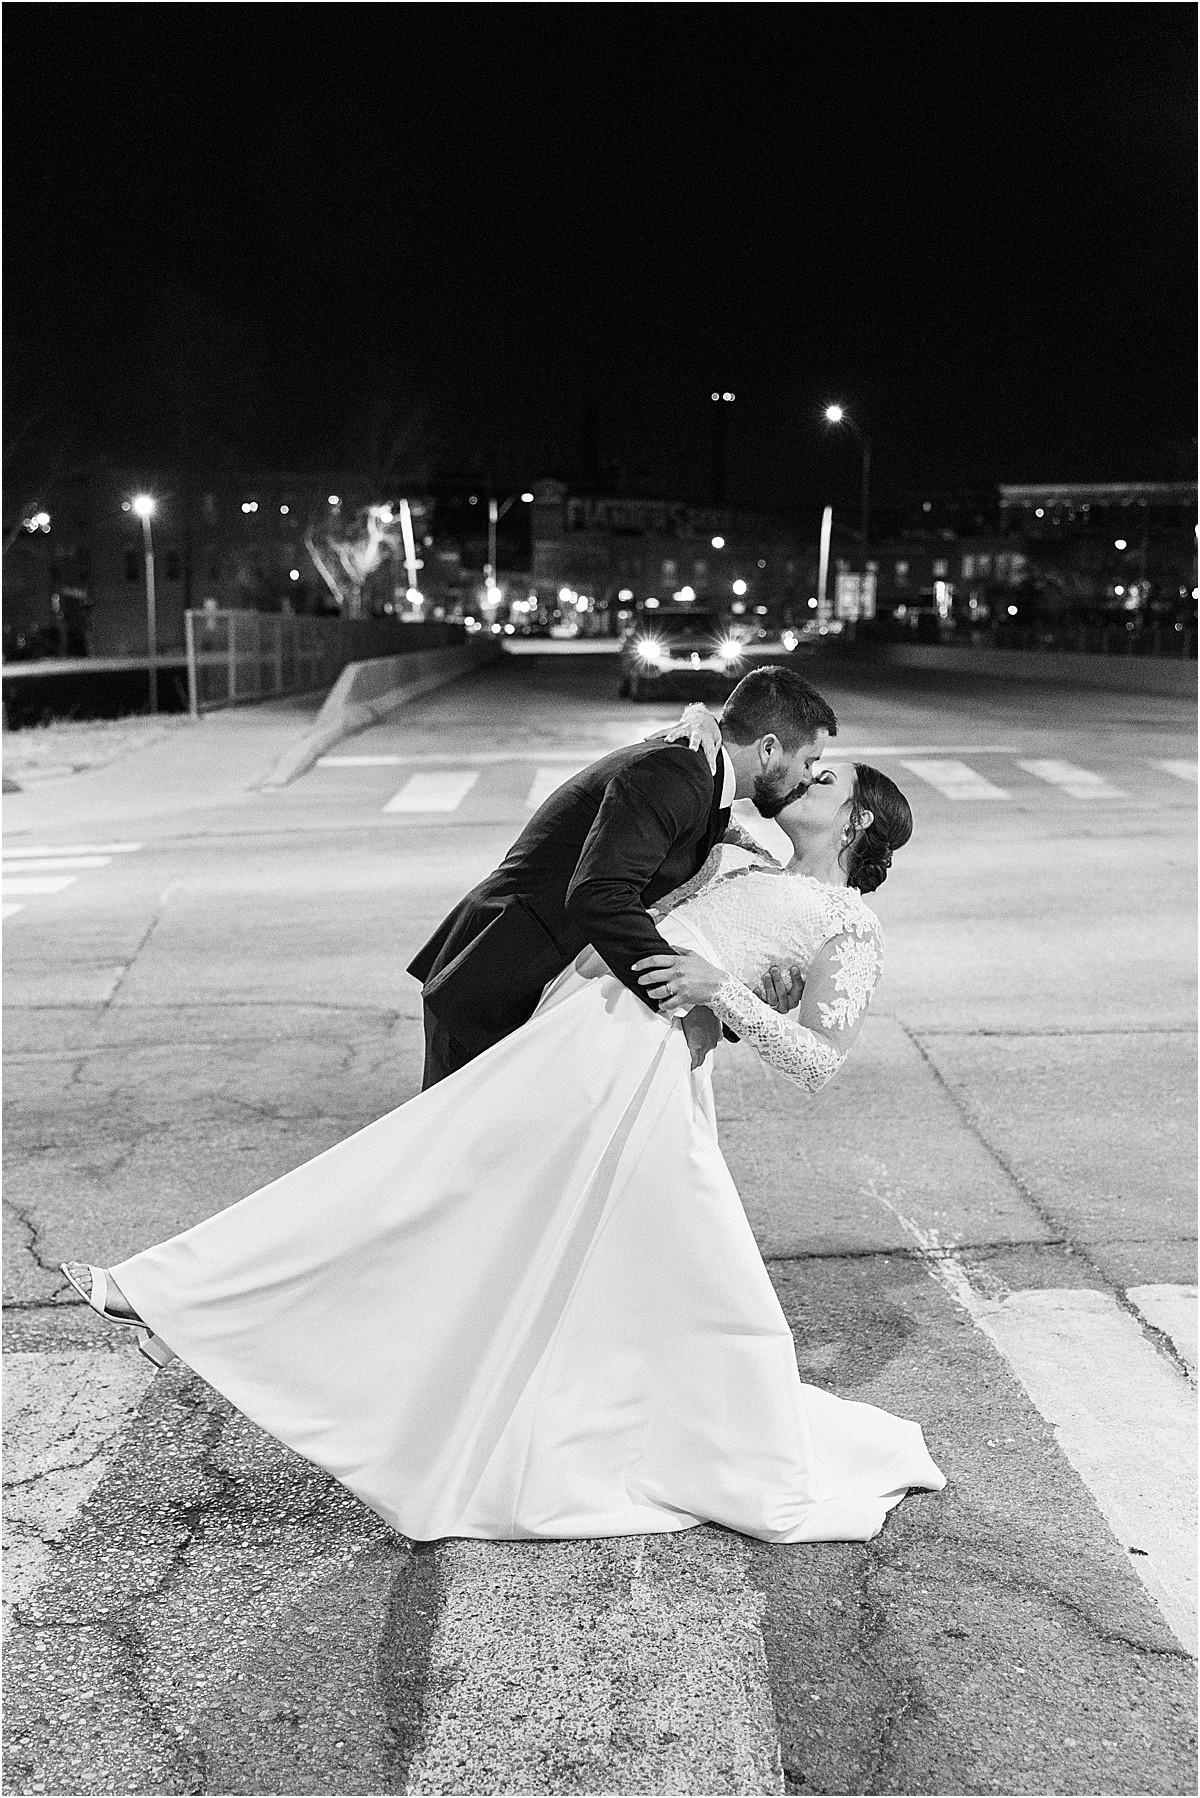 Downtown nightime wedding portraits at Magnolia Venue and Urban Garden by Kansas City Photographer West Rose Photo and Film